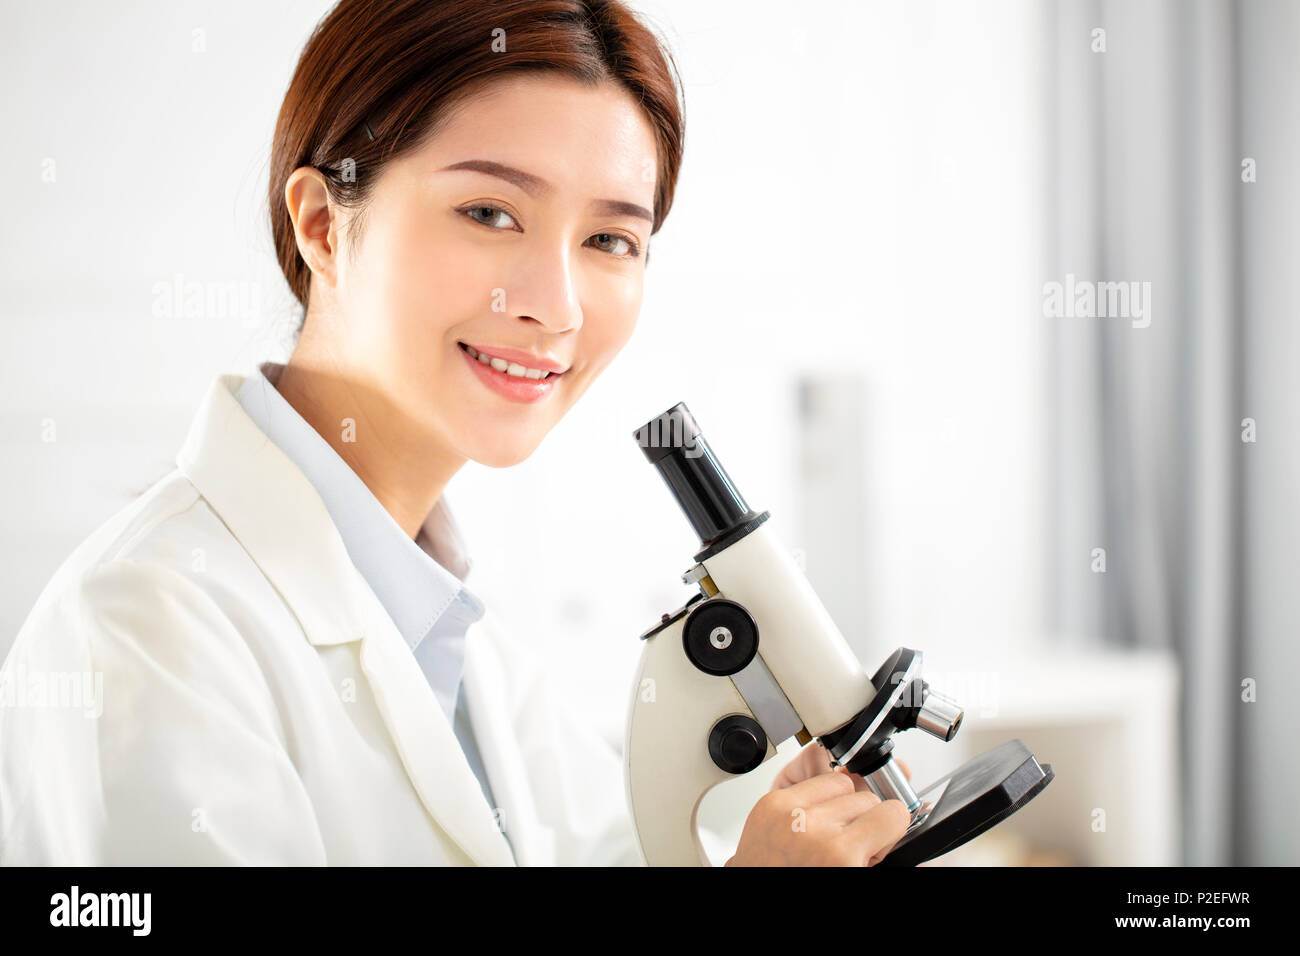 female medical or scientific researcher working in office Stock Photo